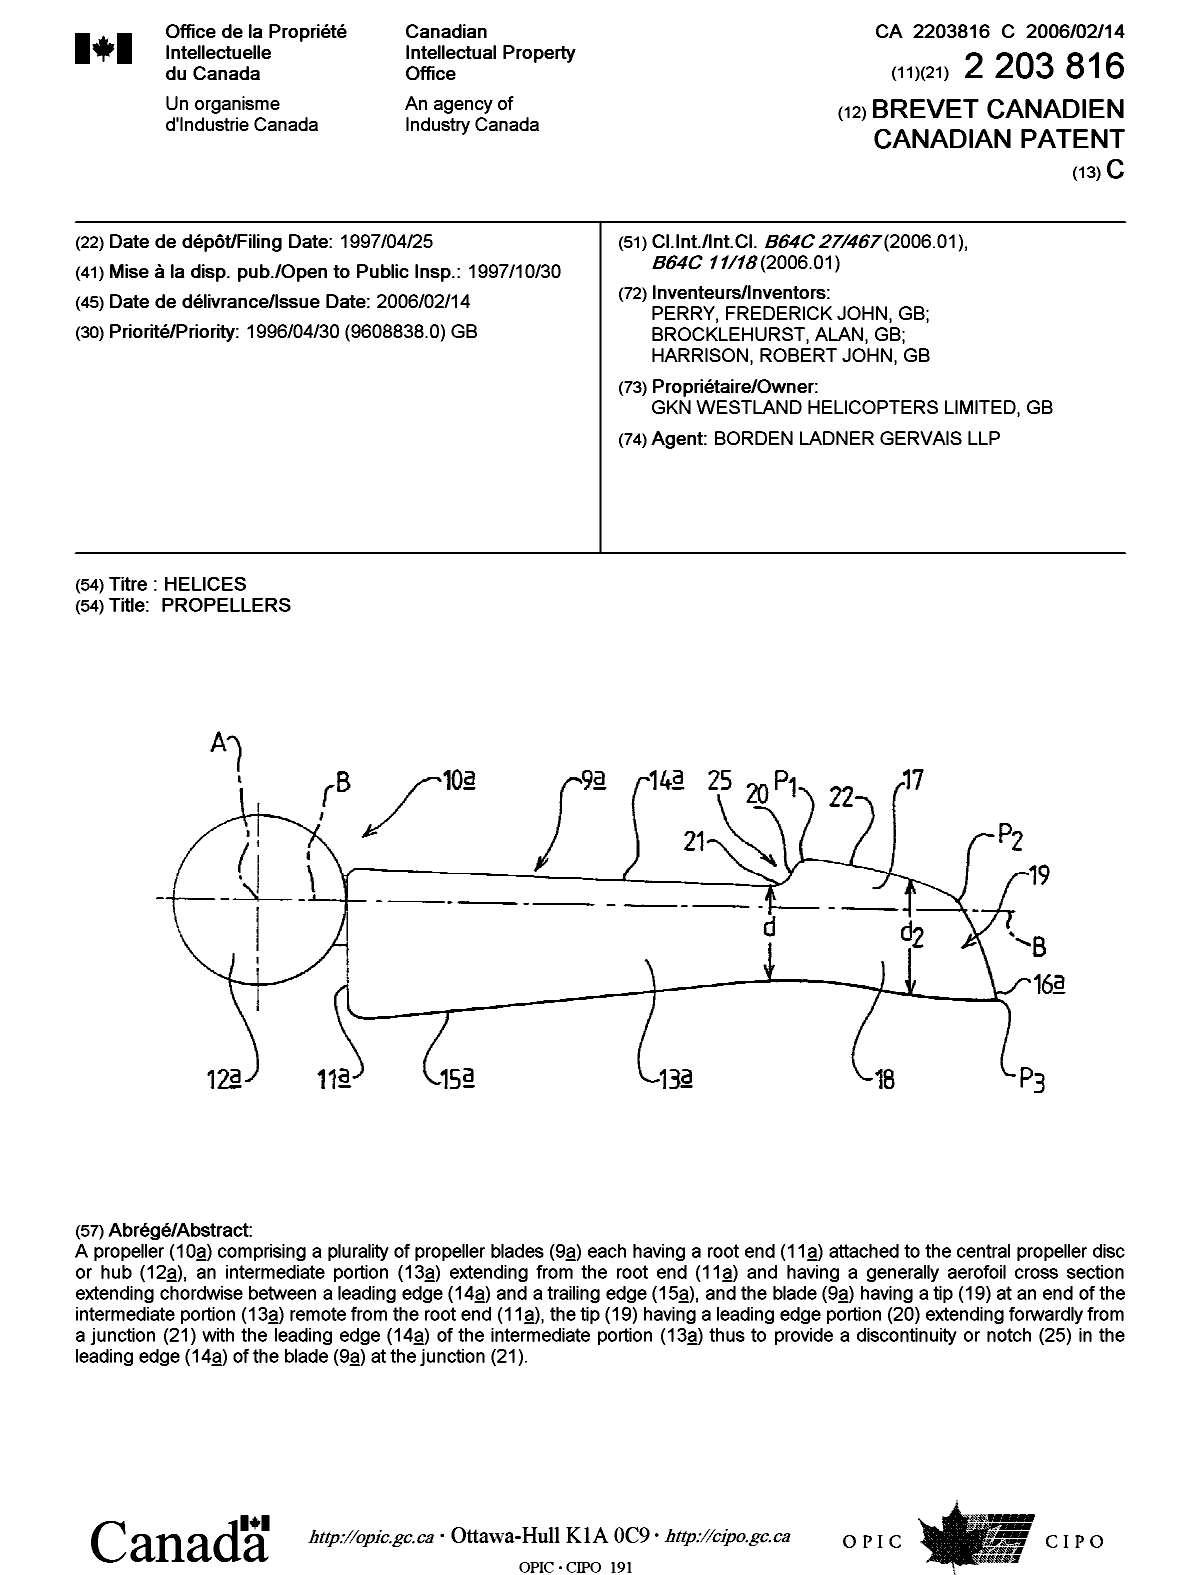 Canadian Patent Document 2203816. Cover Page 20060110. Image 1 of 1